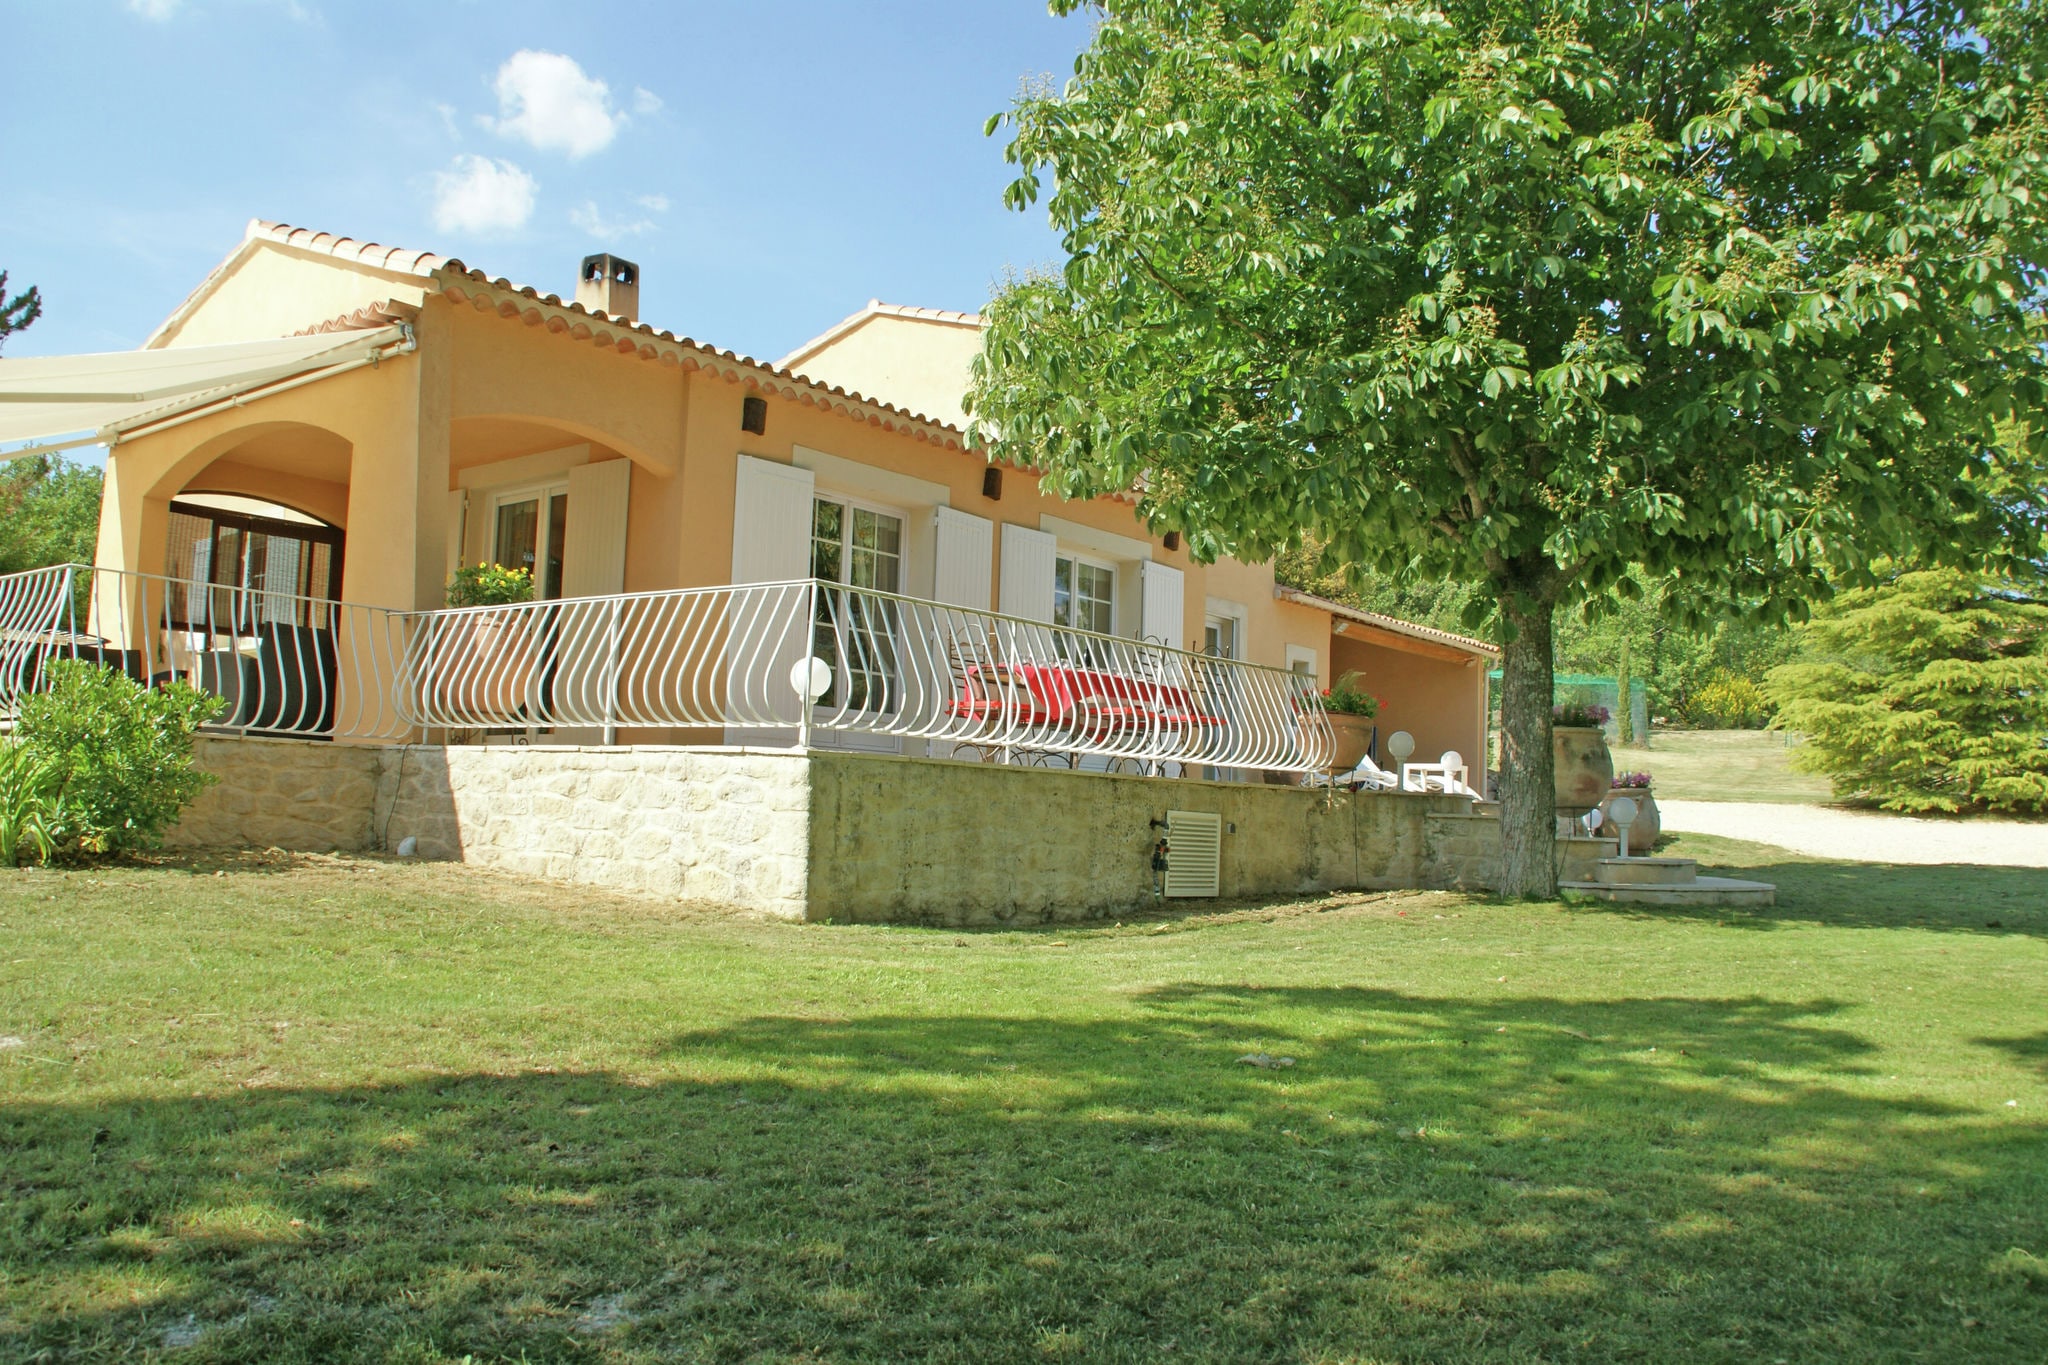 Detached villa with enclosed beautiful garden and private pool, 1km from Céreste